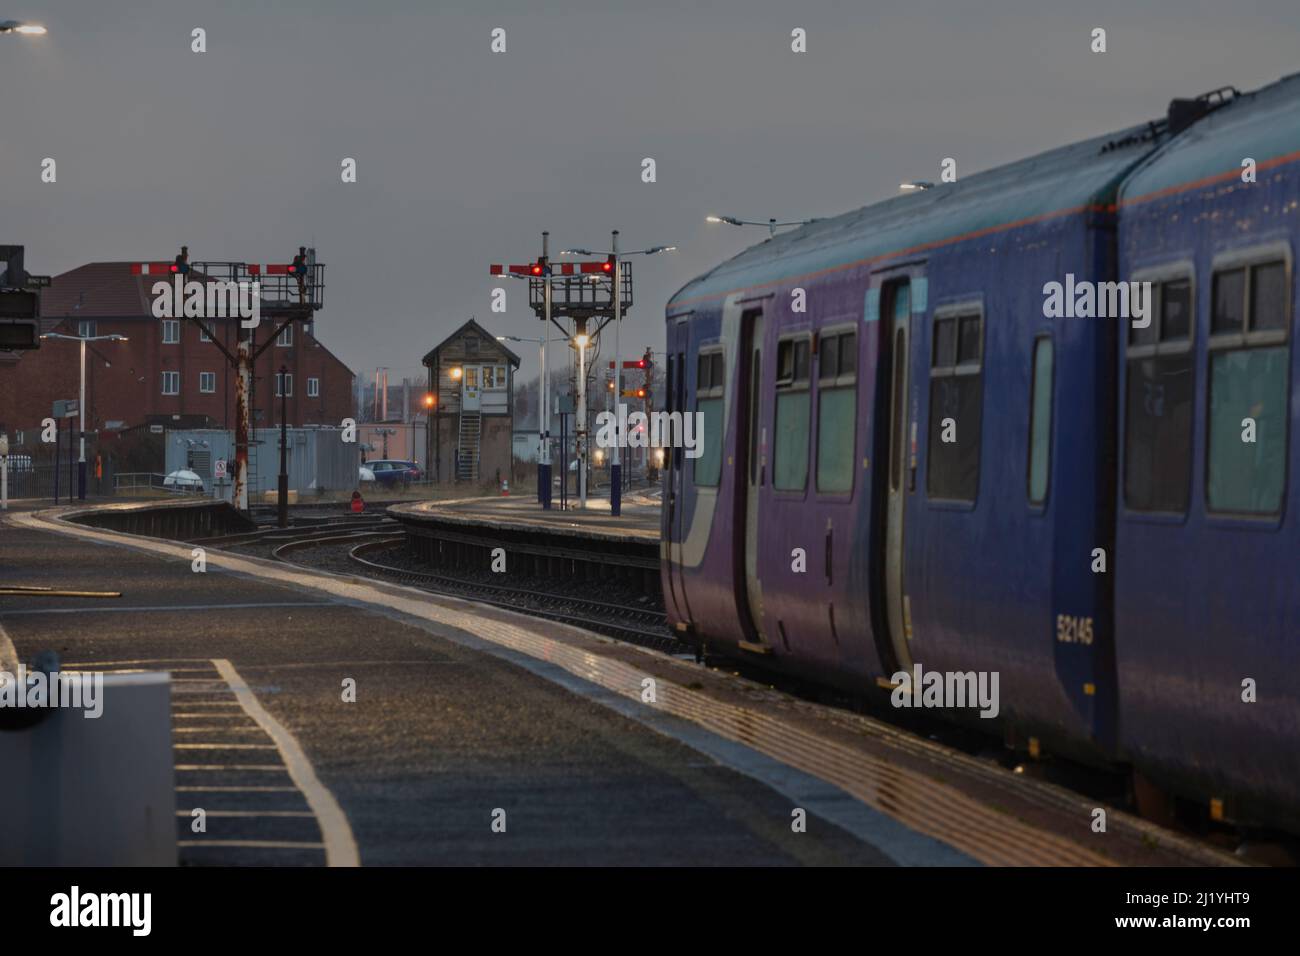 Northern Rail class 150 sprinter trainat Blackpool North railway station with the mechanical semaphore bracket signals and number 2 signal box Stock Photo